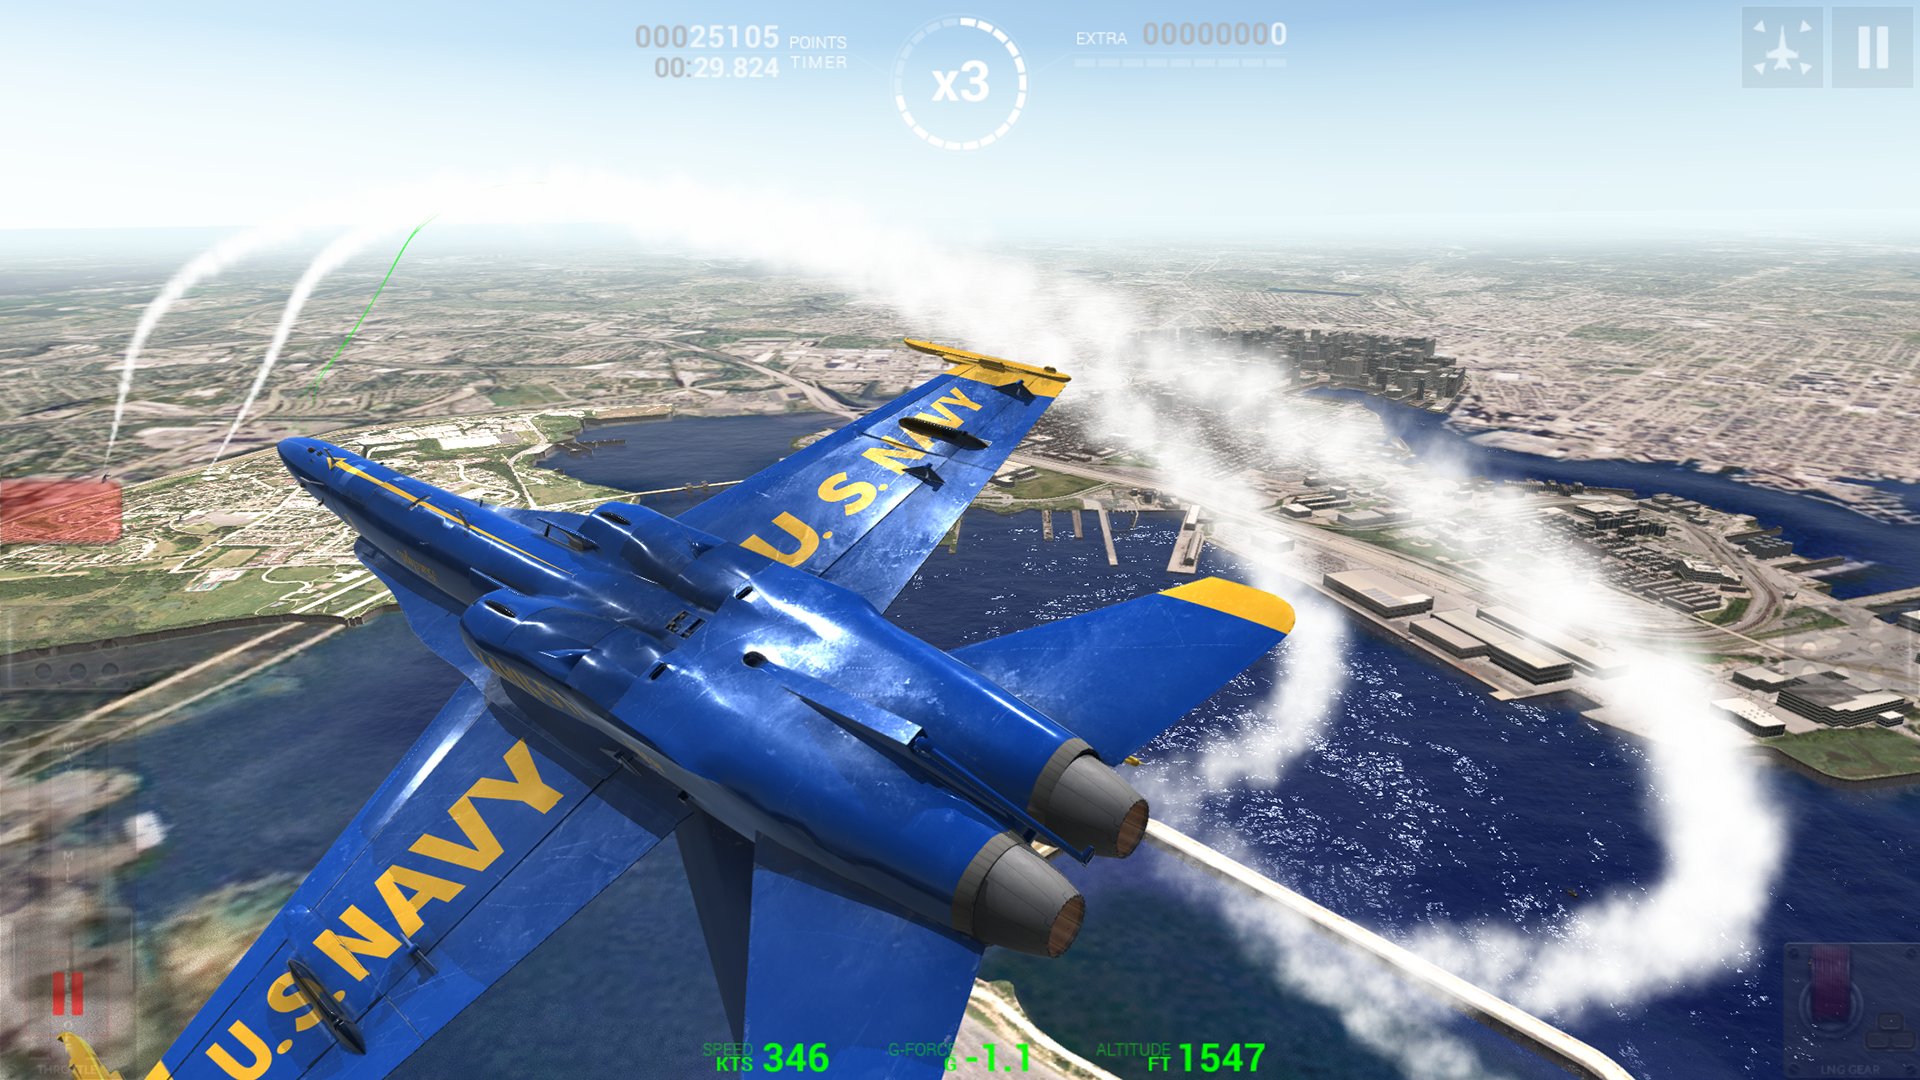 Blue Angels Aerobatic Flight Simulator Available Now on Xbox One